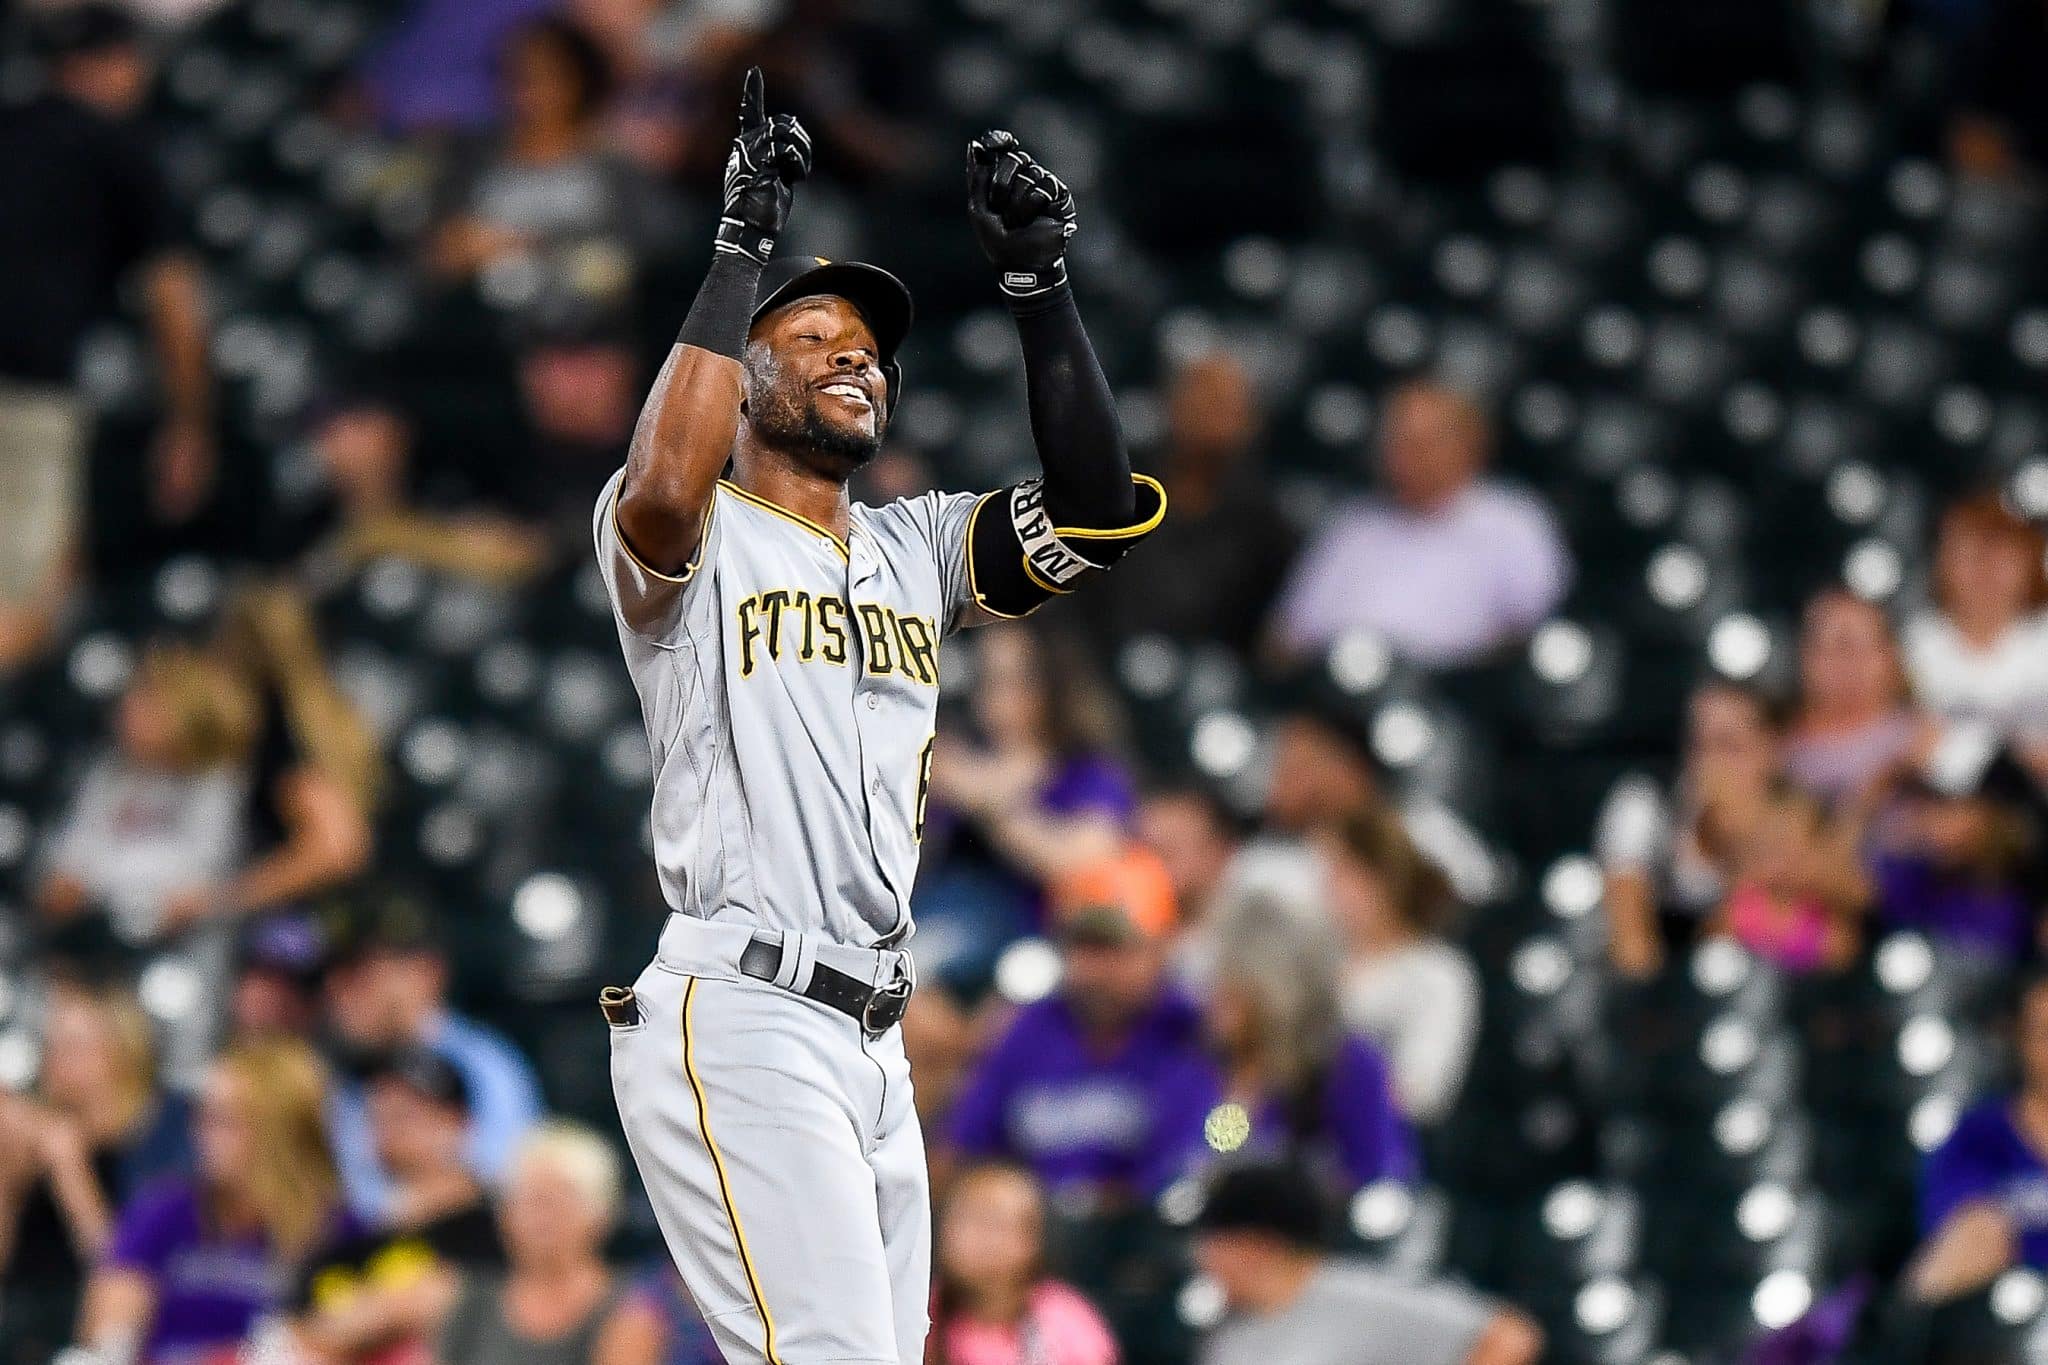 DENVER, CO - AUGUST 31: Starling Marte #6 of the Pittsburgh Pirates celebrates after a ninth inning run-scoring single against the Colorado Rockies at Coors Field on August 31, 2019 in Denver, Colorado.